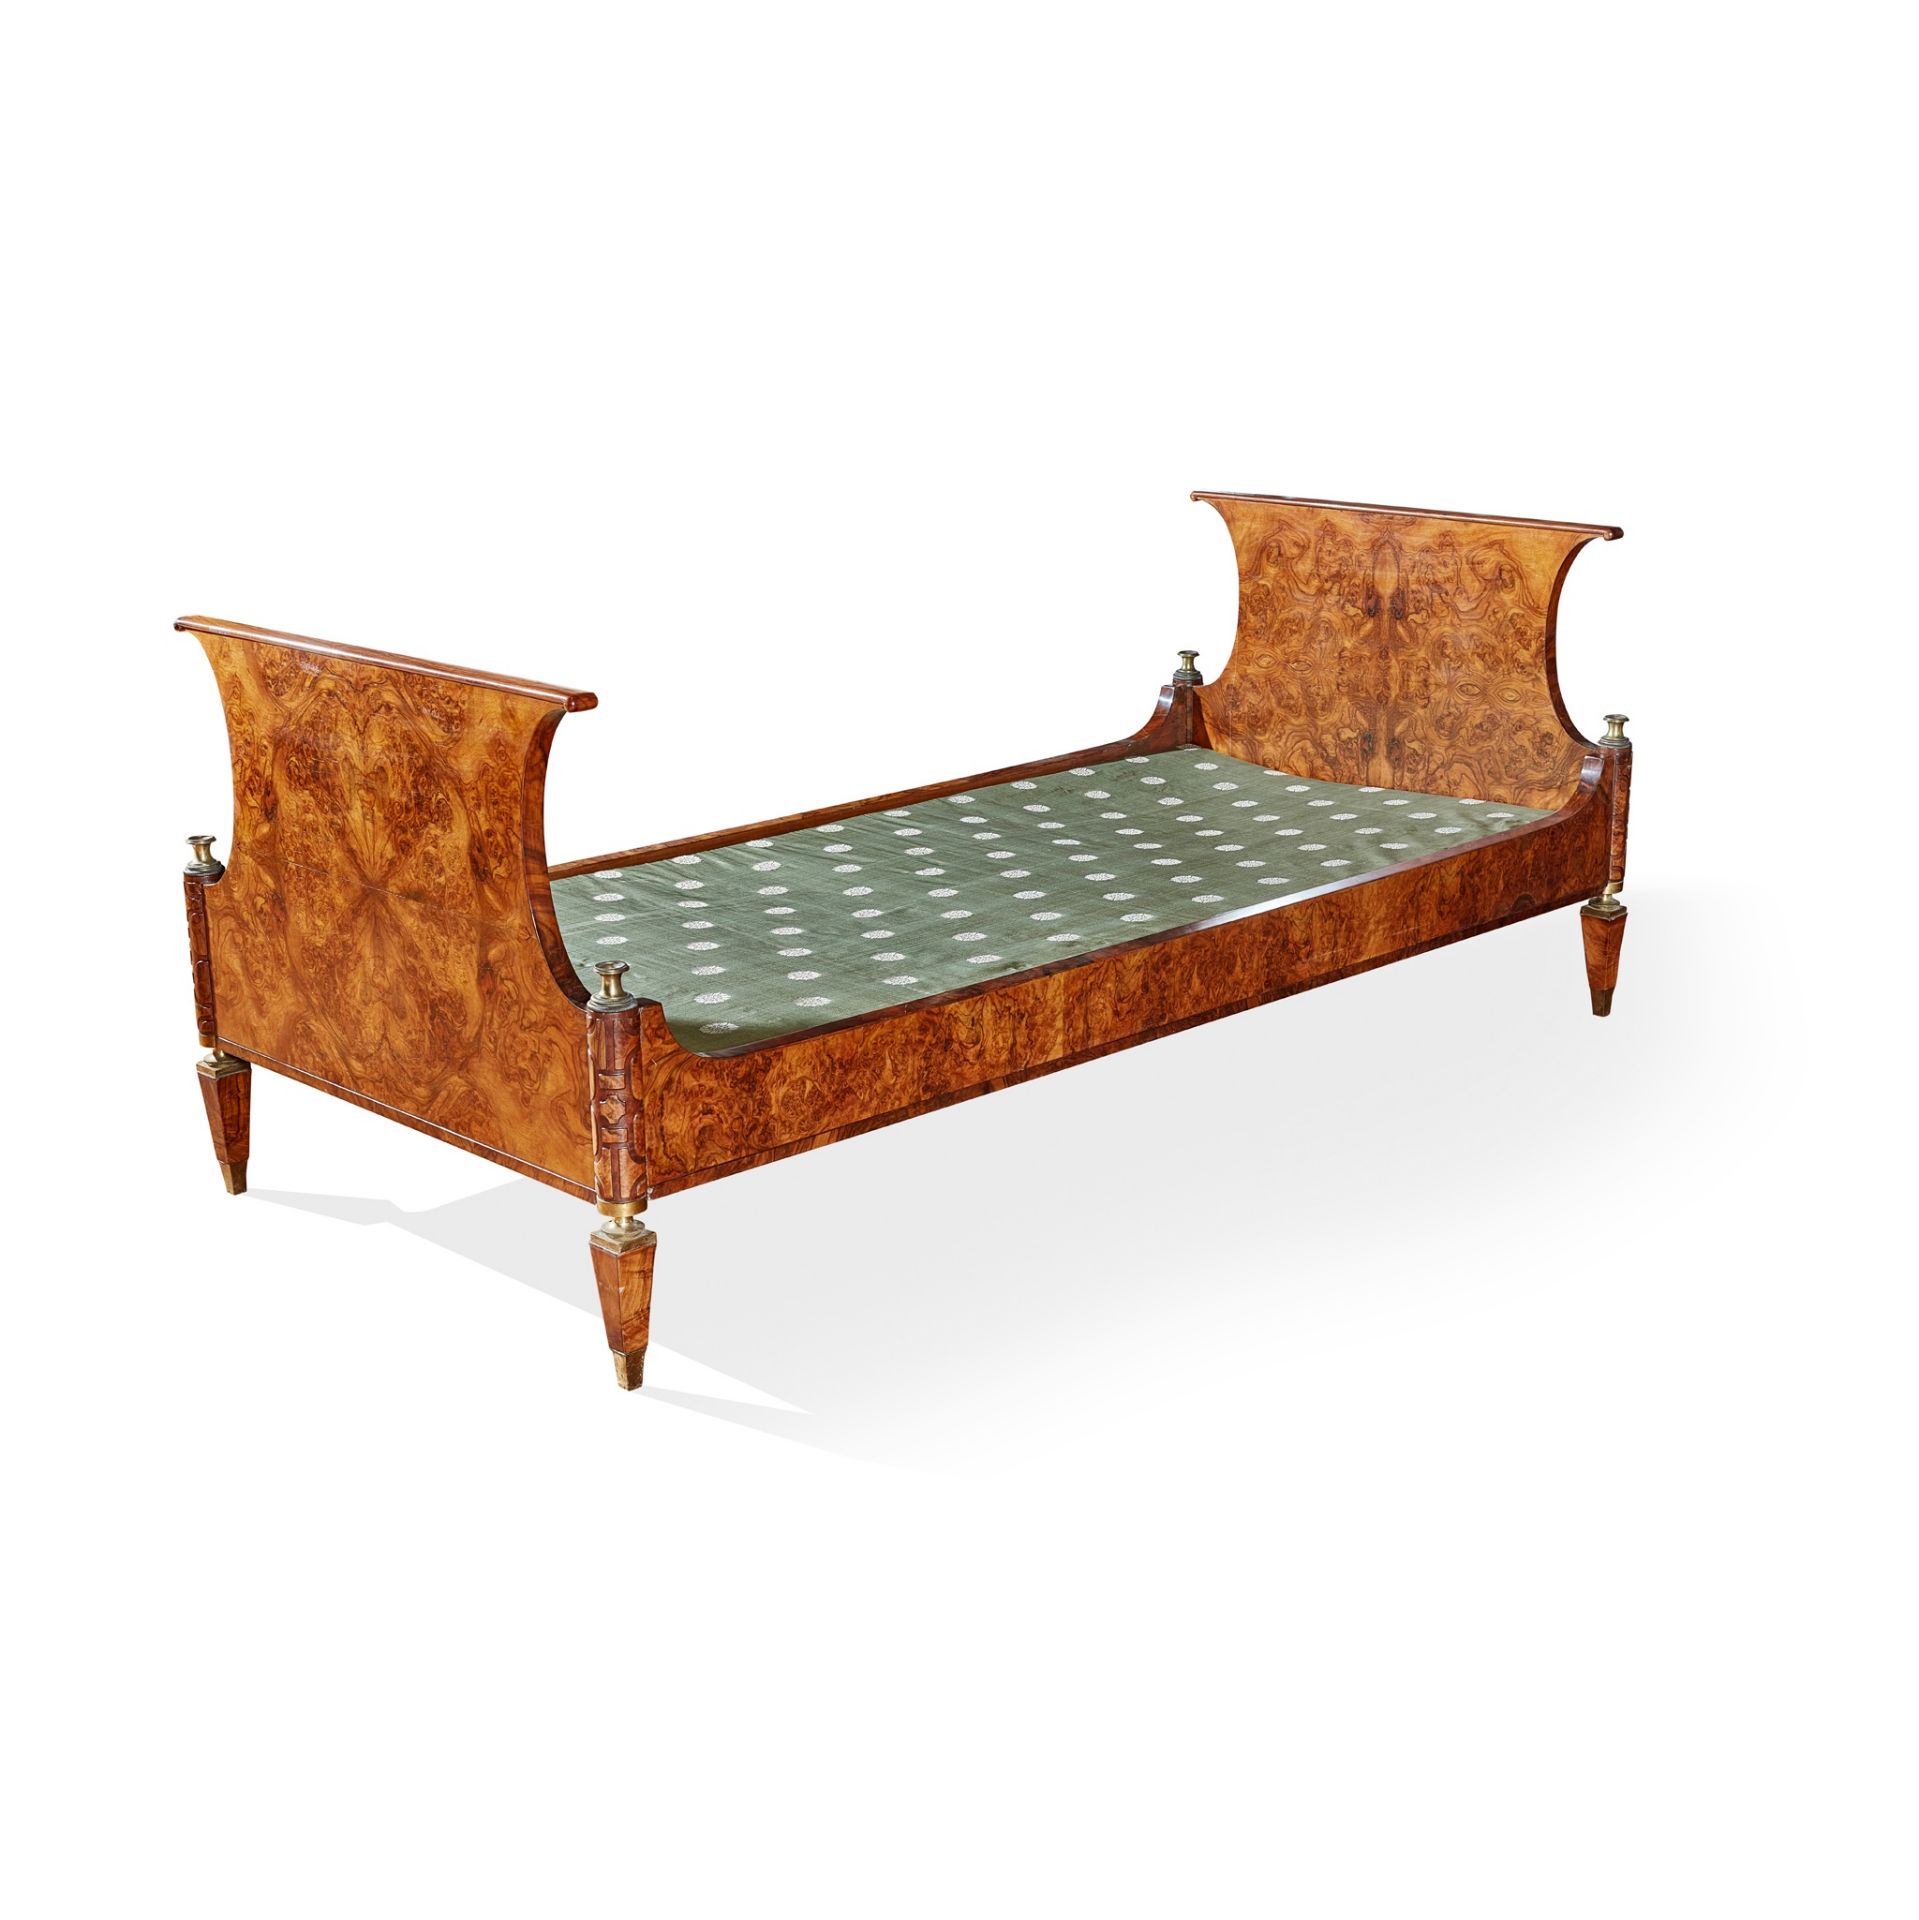 ◆ GIO PONTI (ITALIAN 1891-1979) IMPORTANT DAYBED, 1927